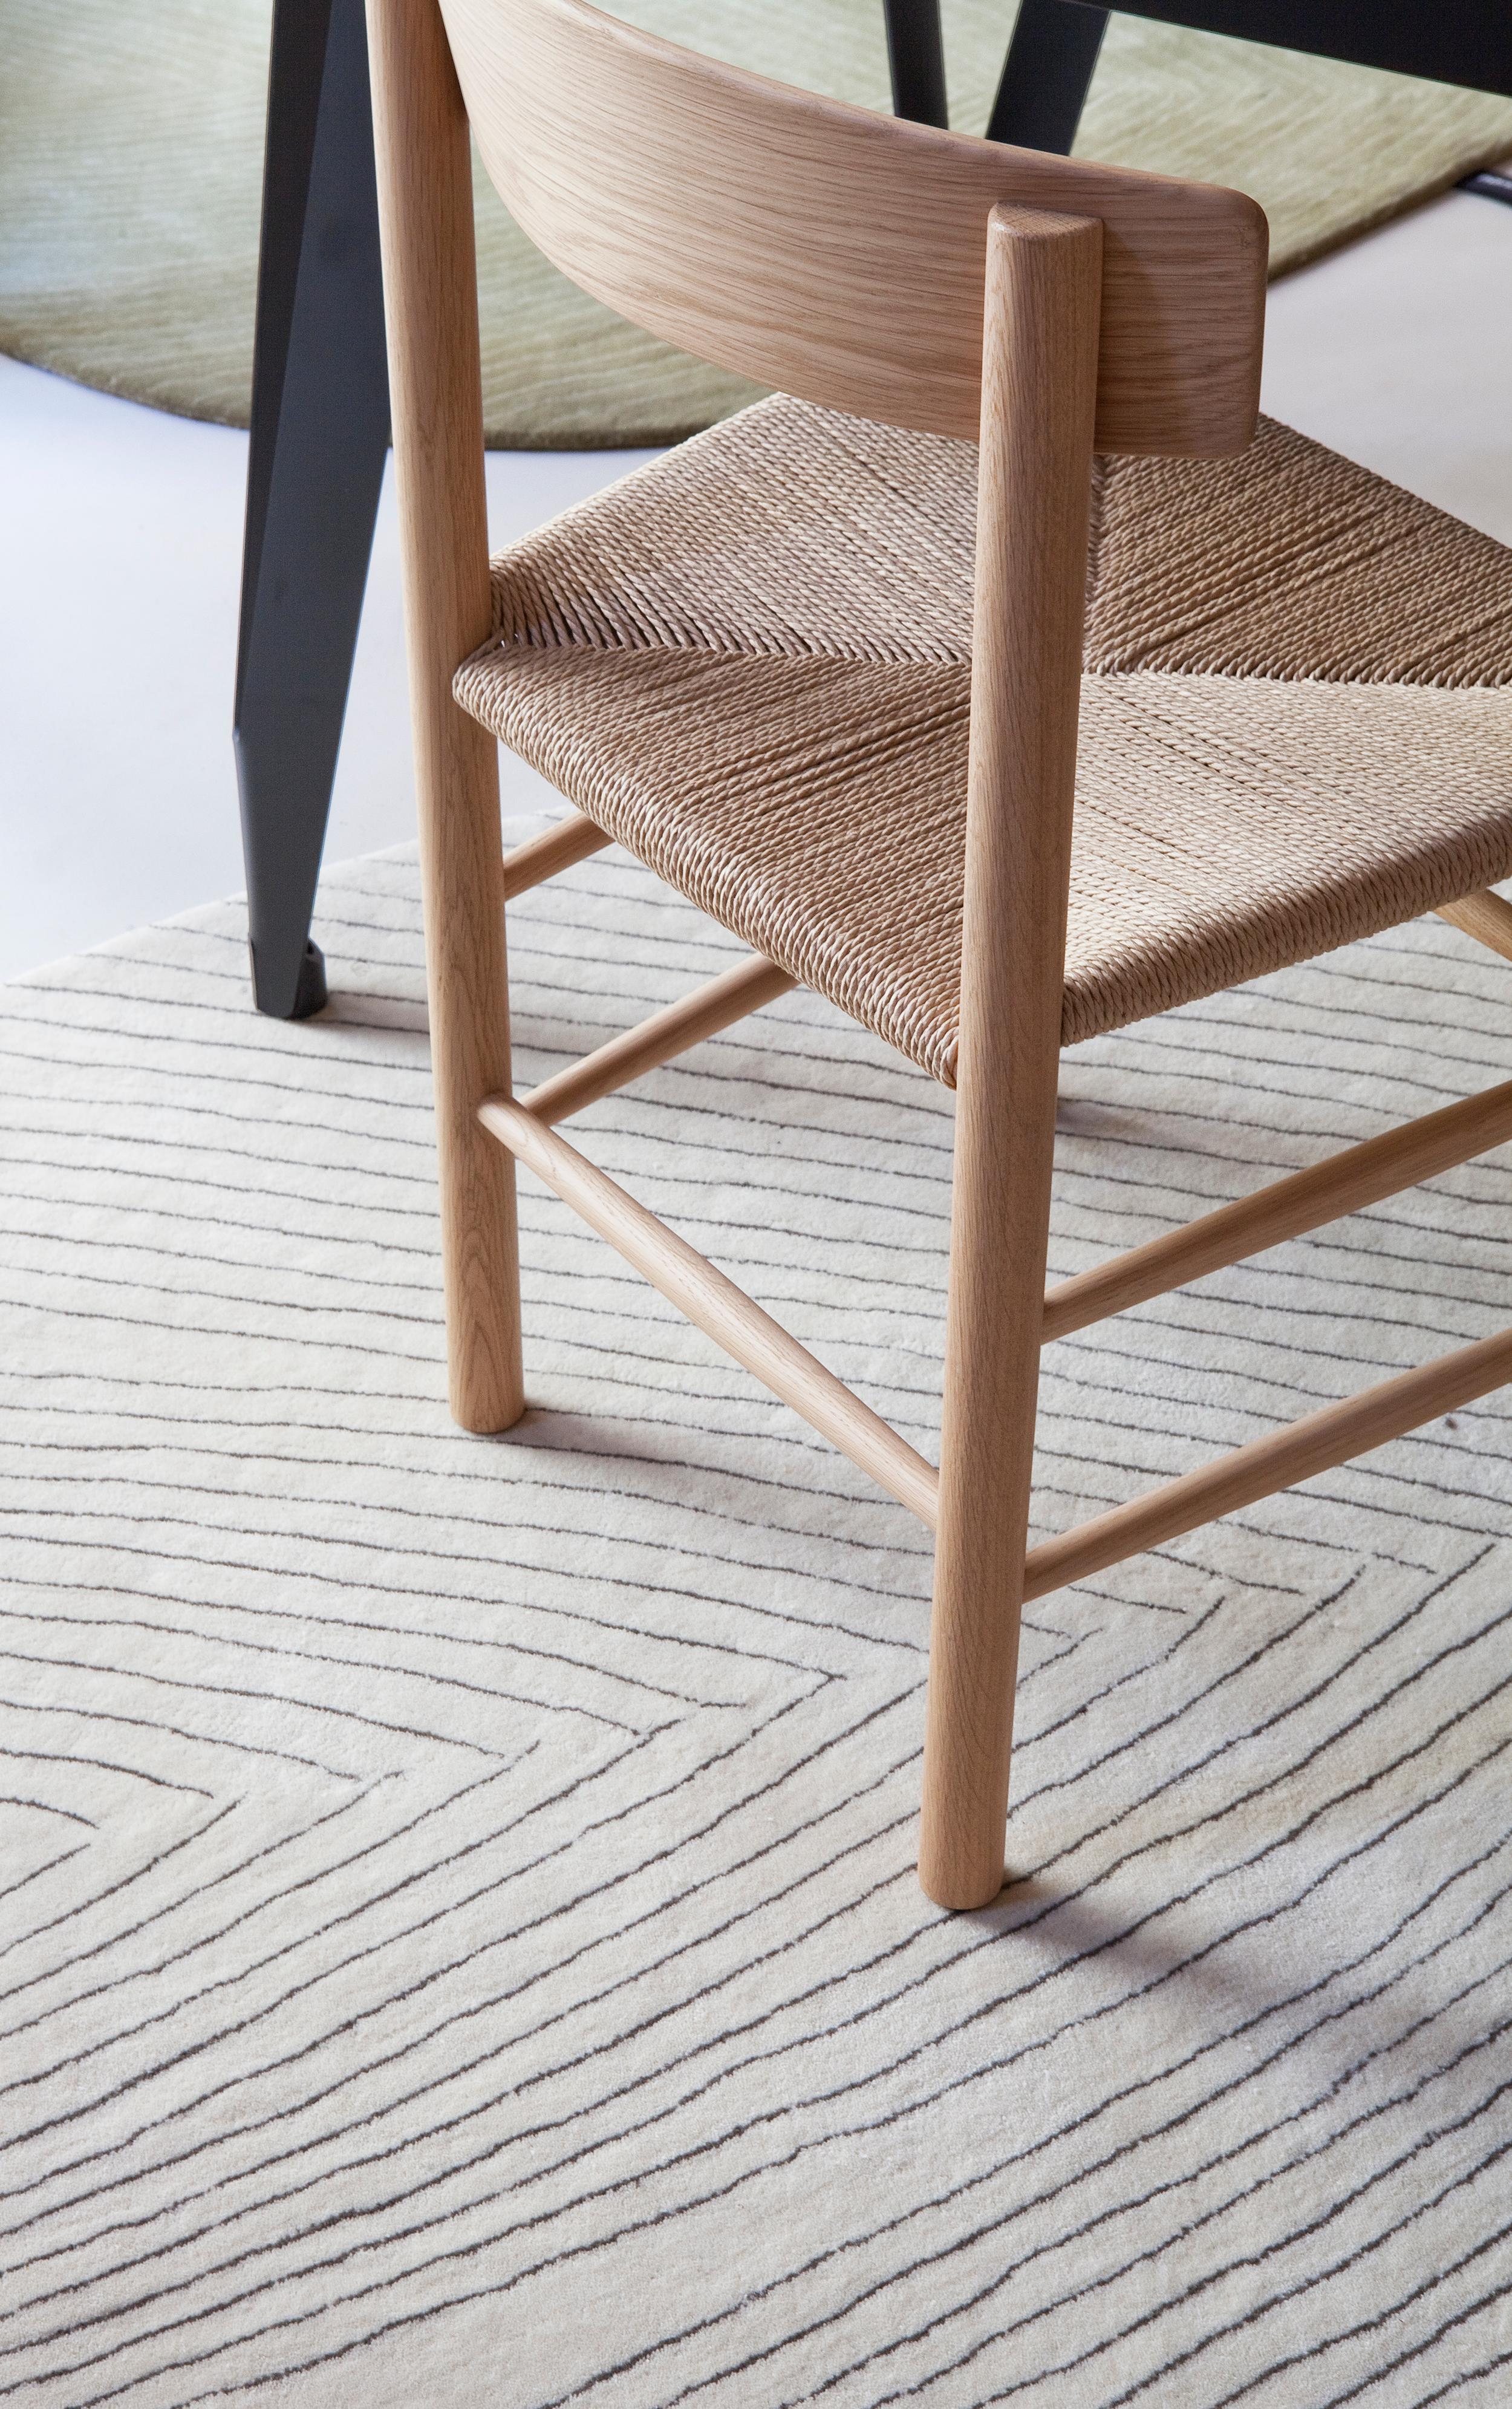 Mid-Century Modern 'Quill L' Rug by Nao Tamura for Nanimarquina For Sale